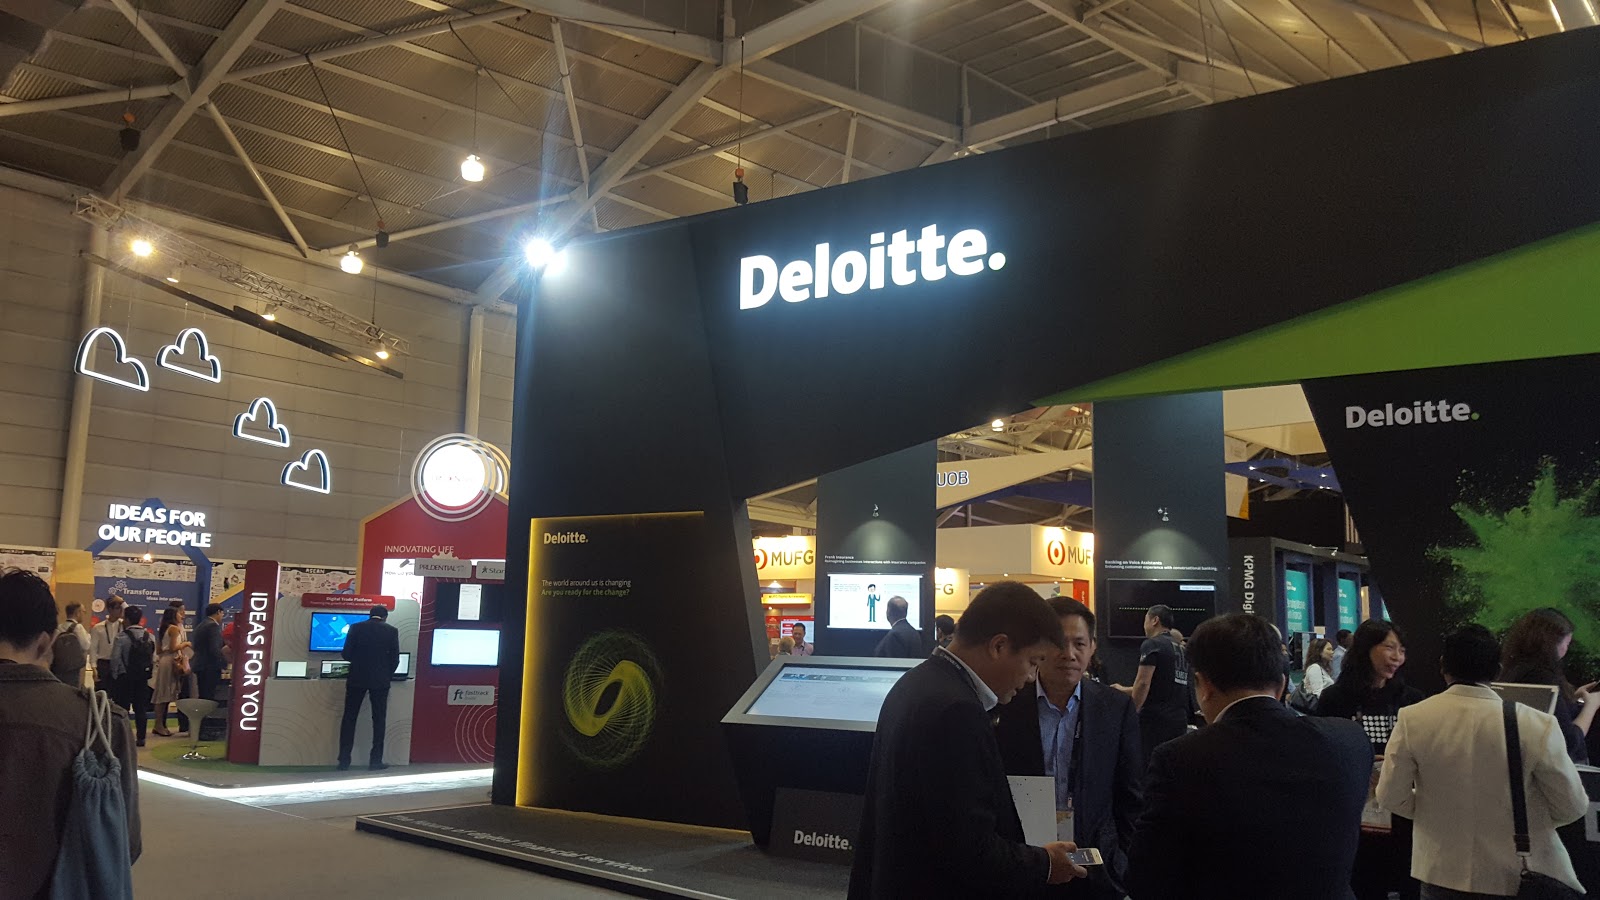 Corporate sponsor booths like Deloitte’s take up the majority of exhibition real estate